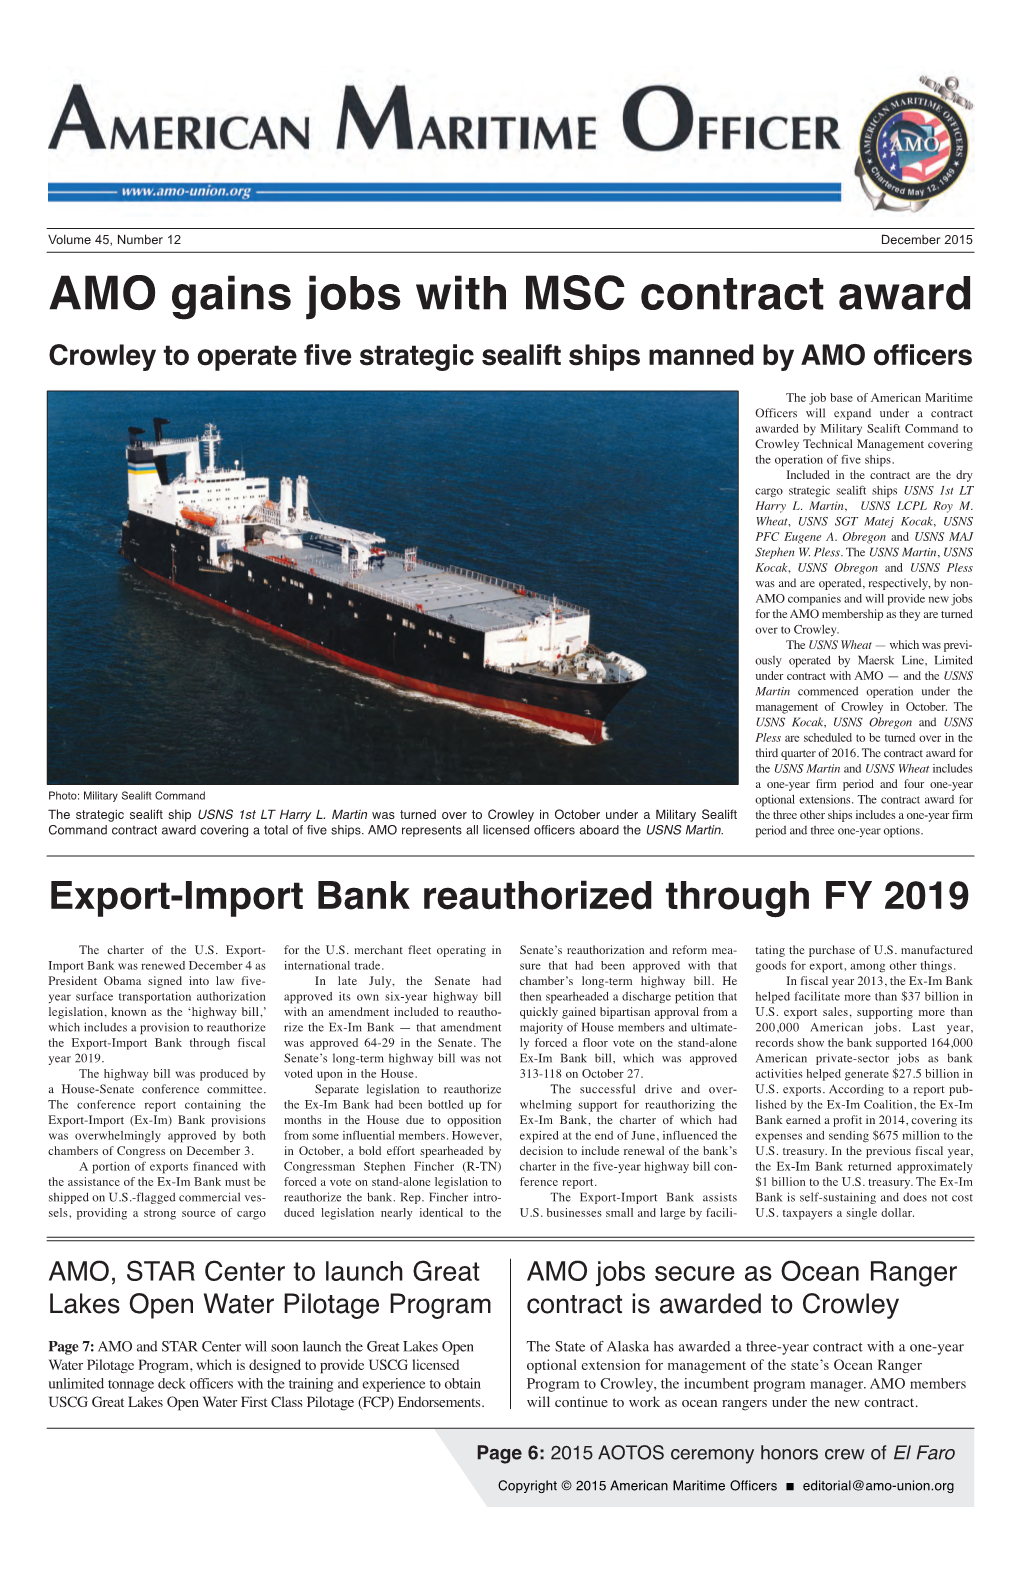 AMO Gains Jobs with MSC Contract Award